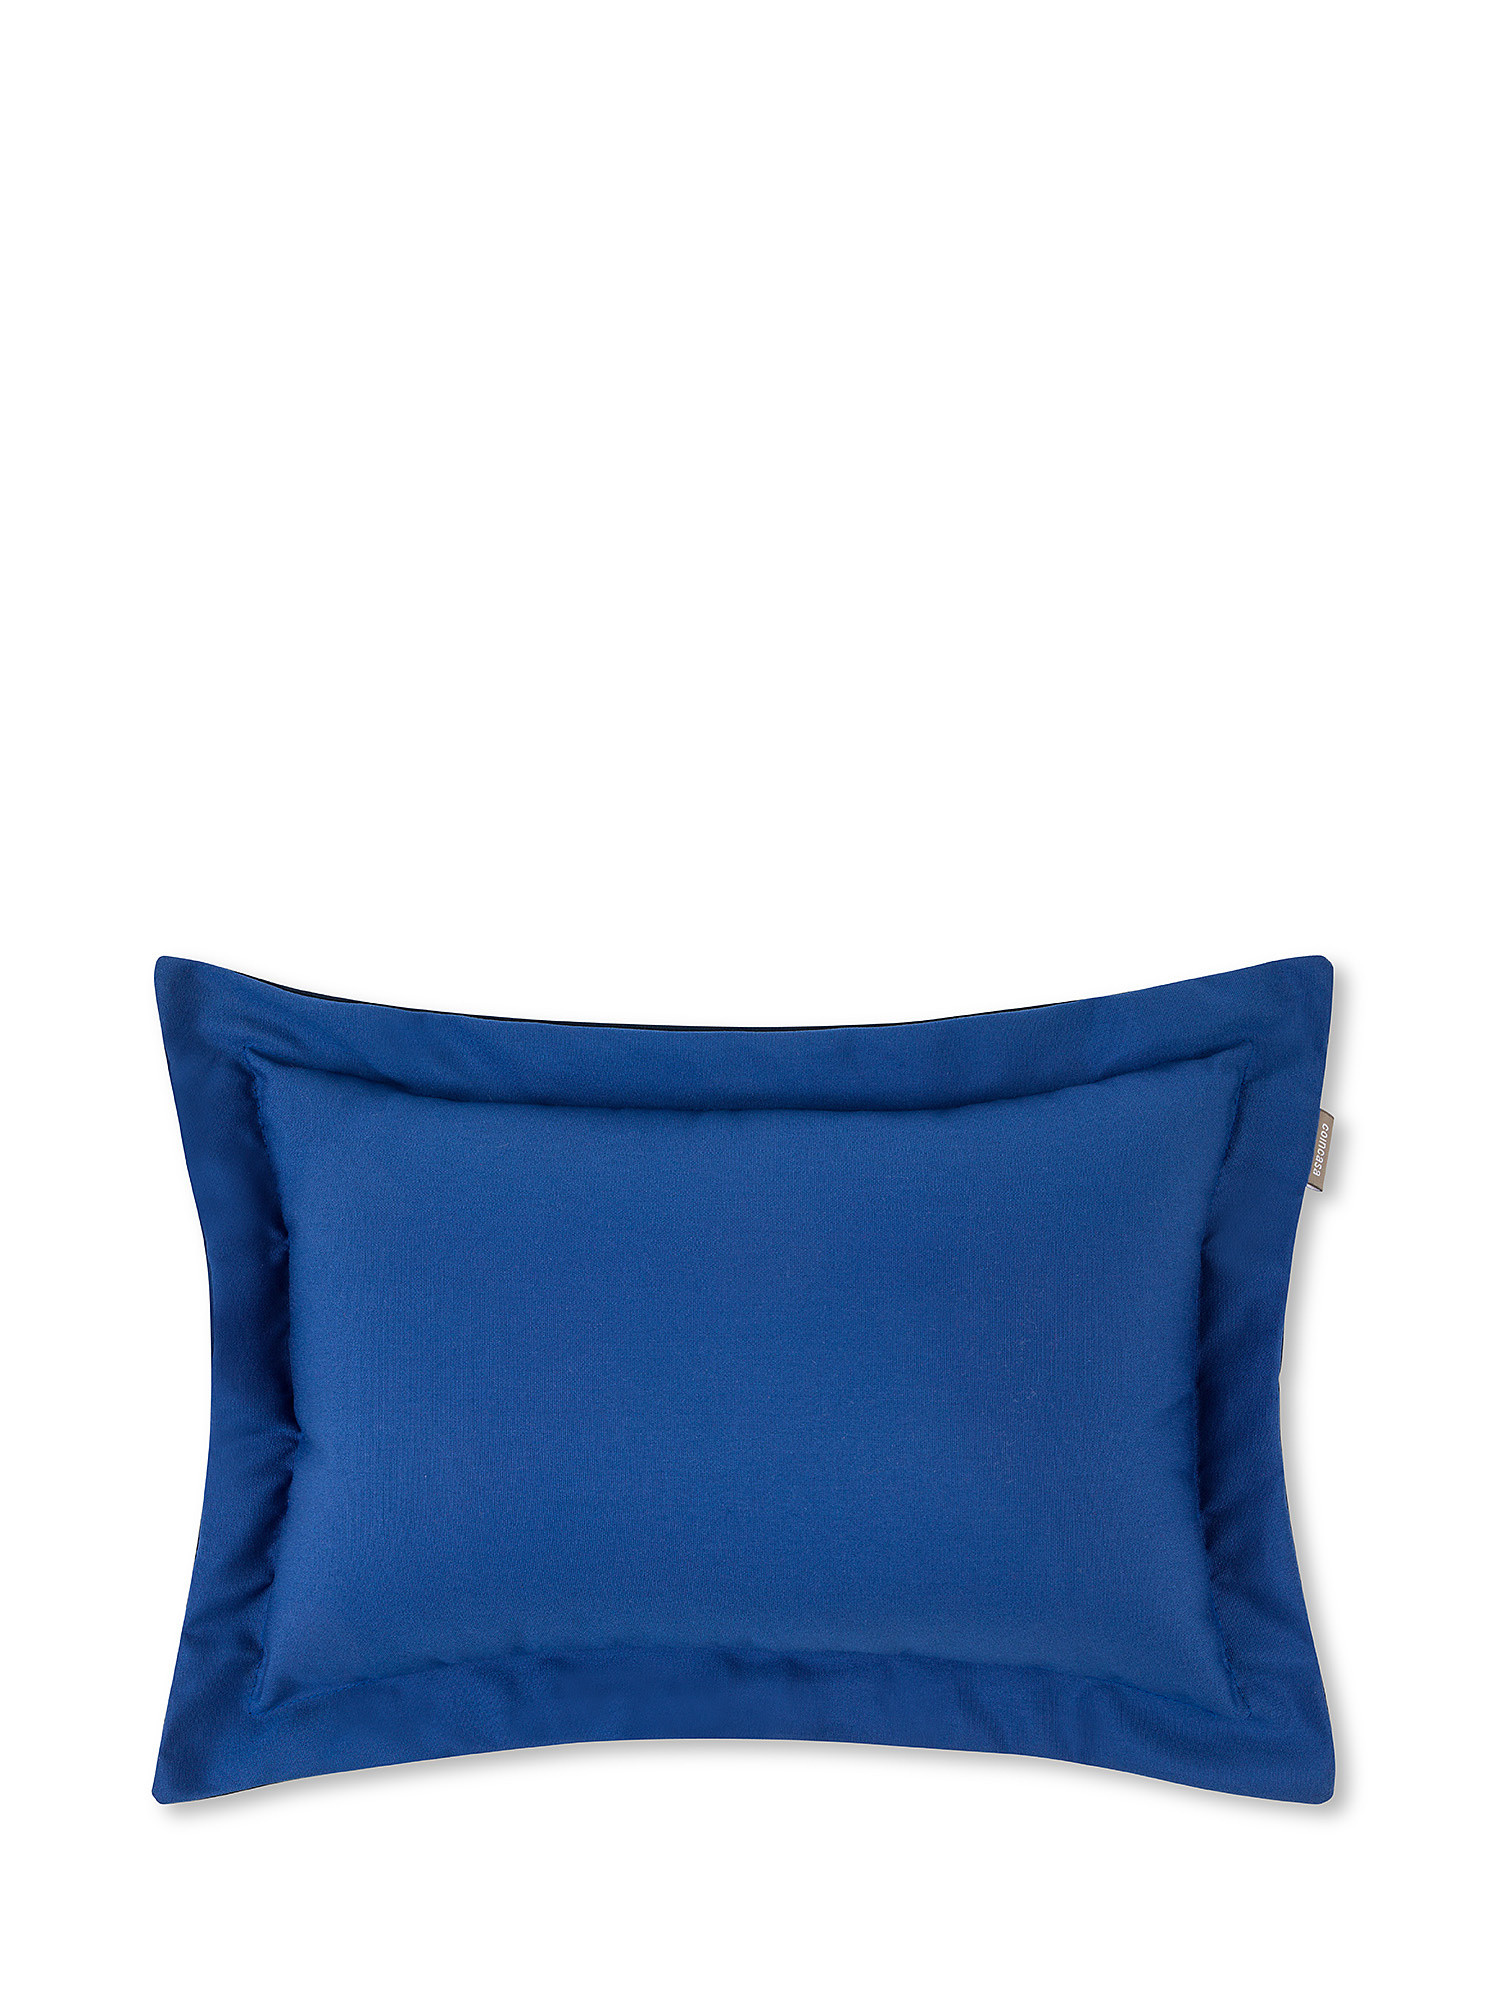 Outdoor cushion in double color fabric 30x50cm, Blue, large image number 0